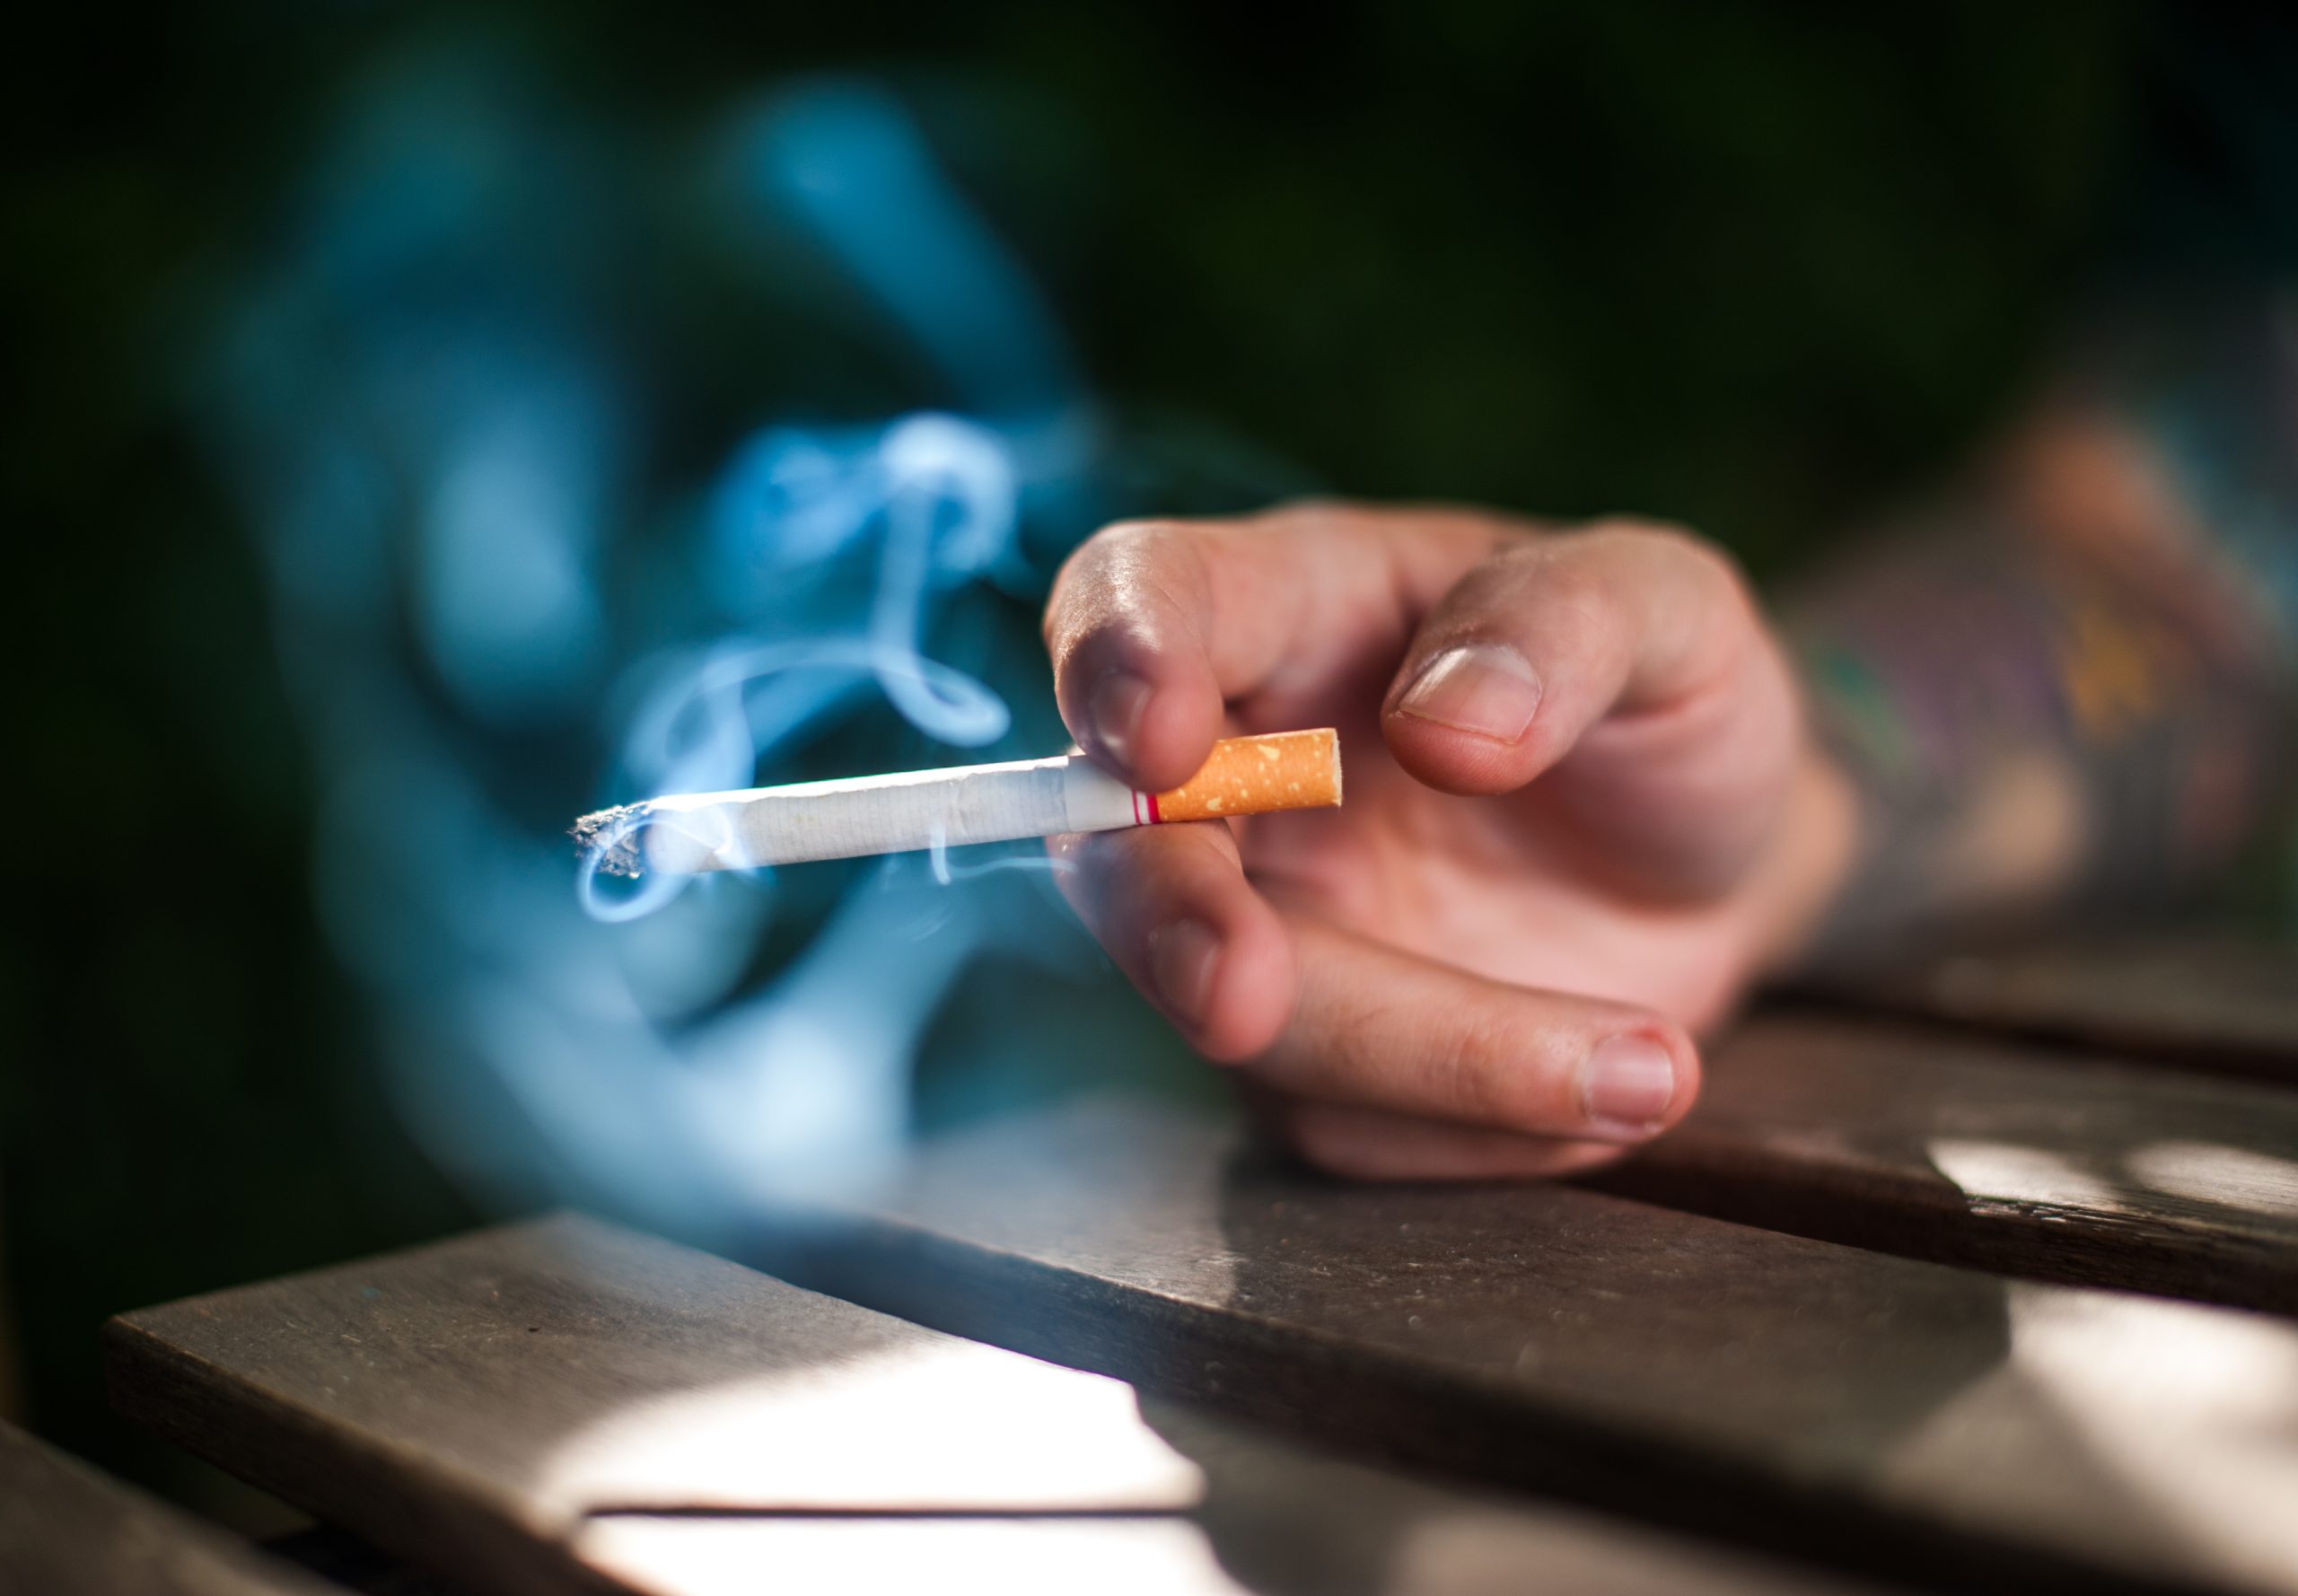 Smoking drops to its lowest level while use of e-cigarettes increases